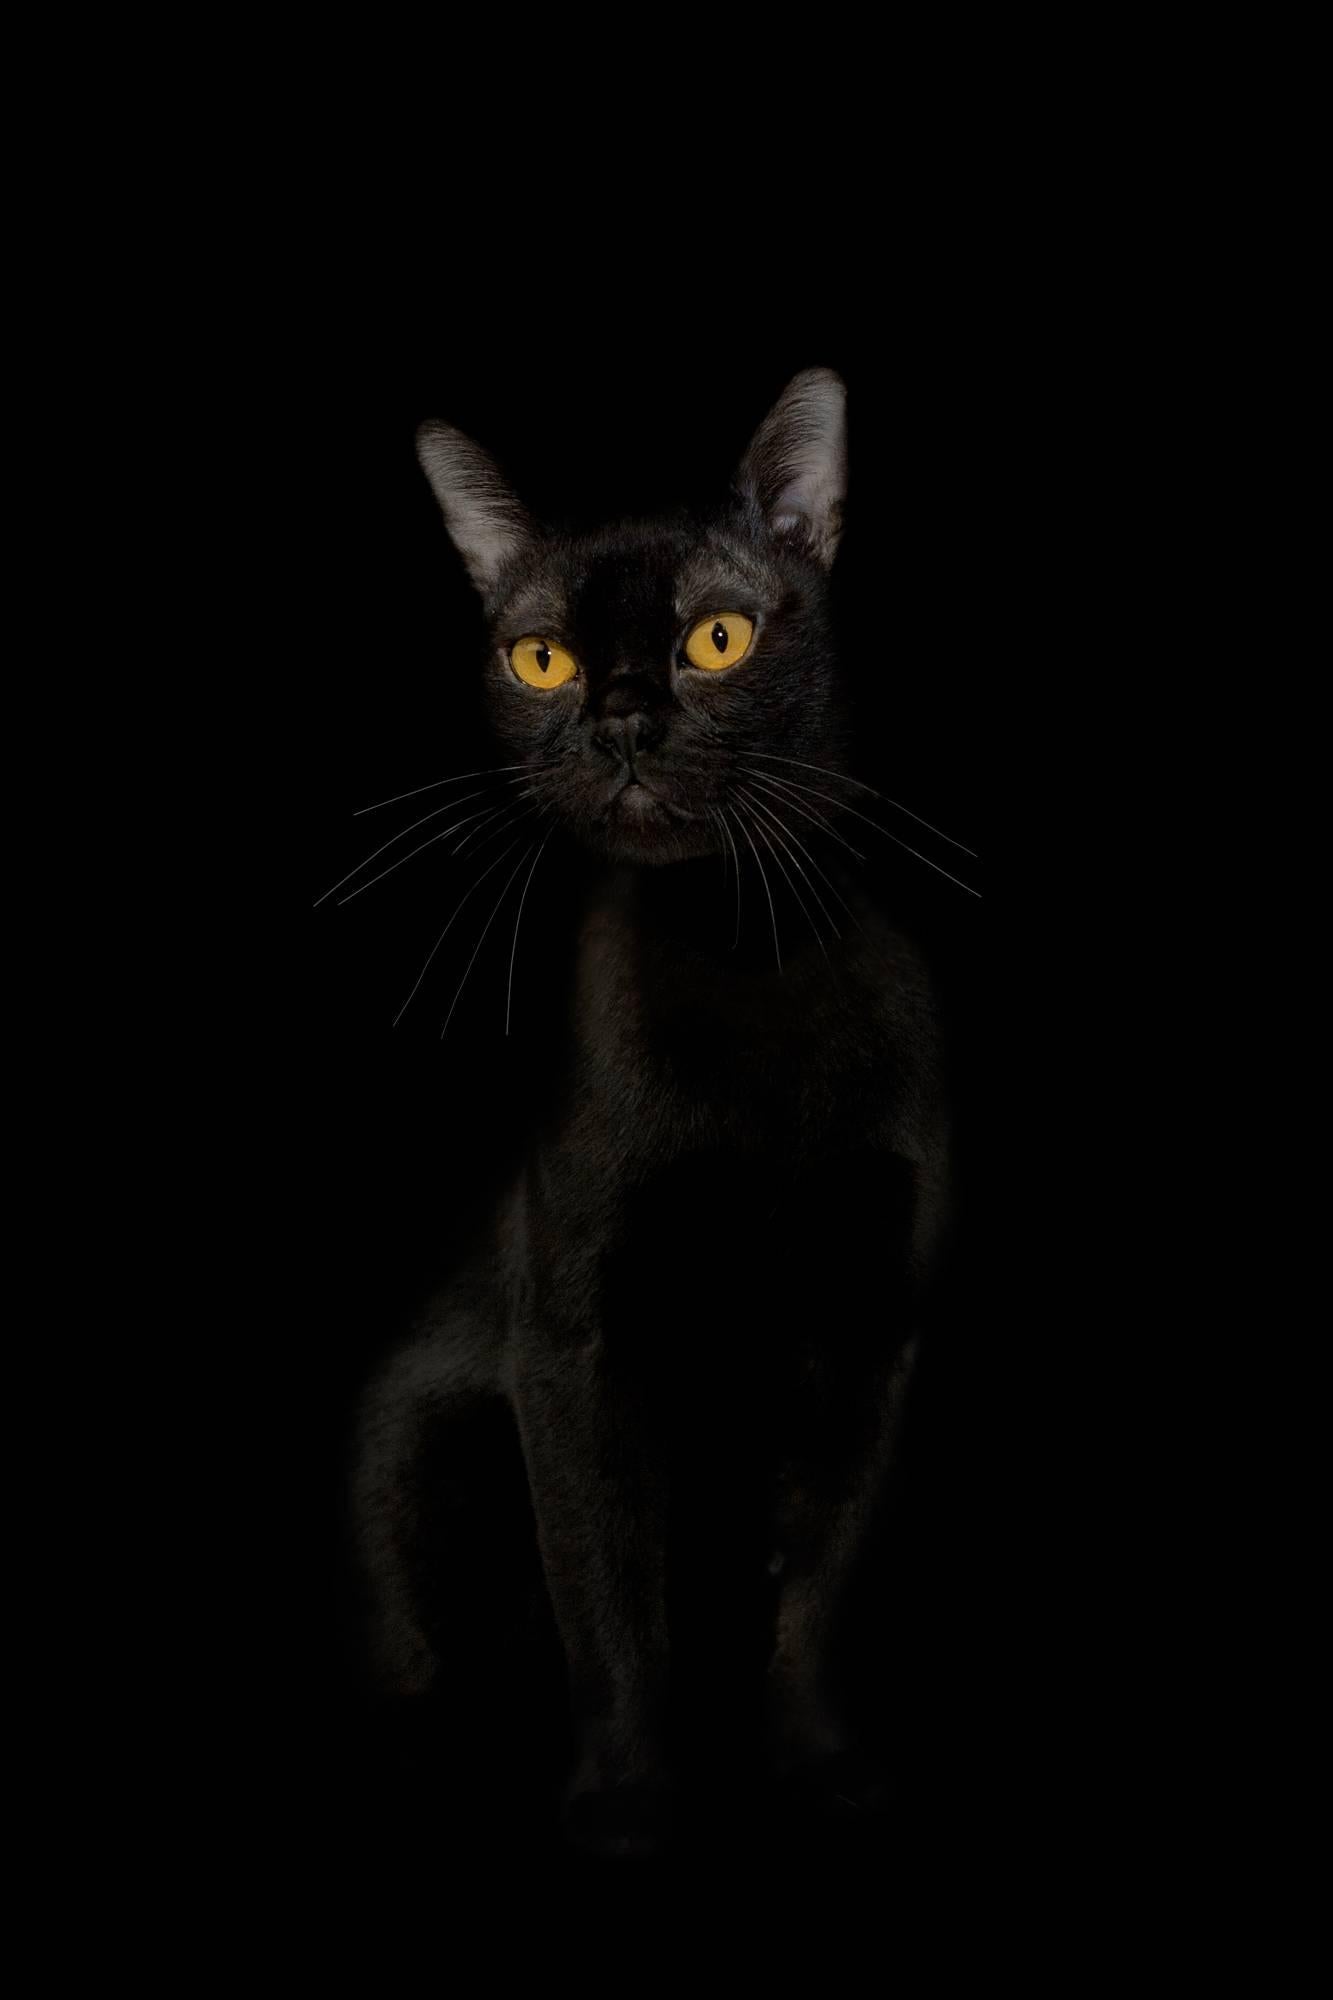 Cat - From the Black beauty series